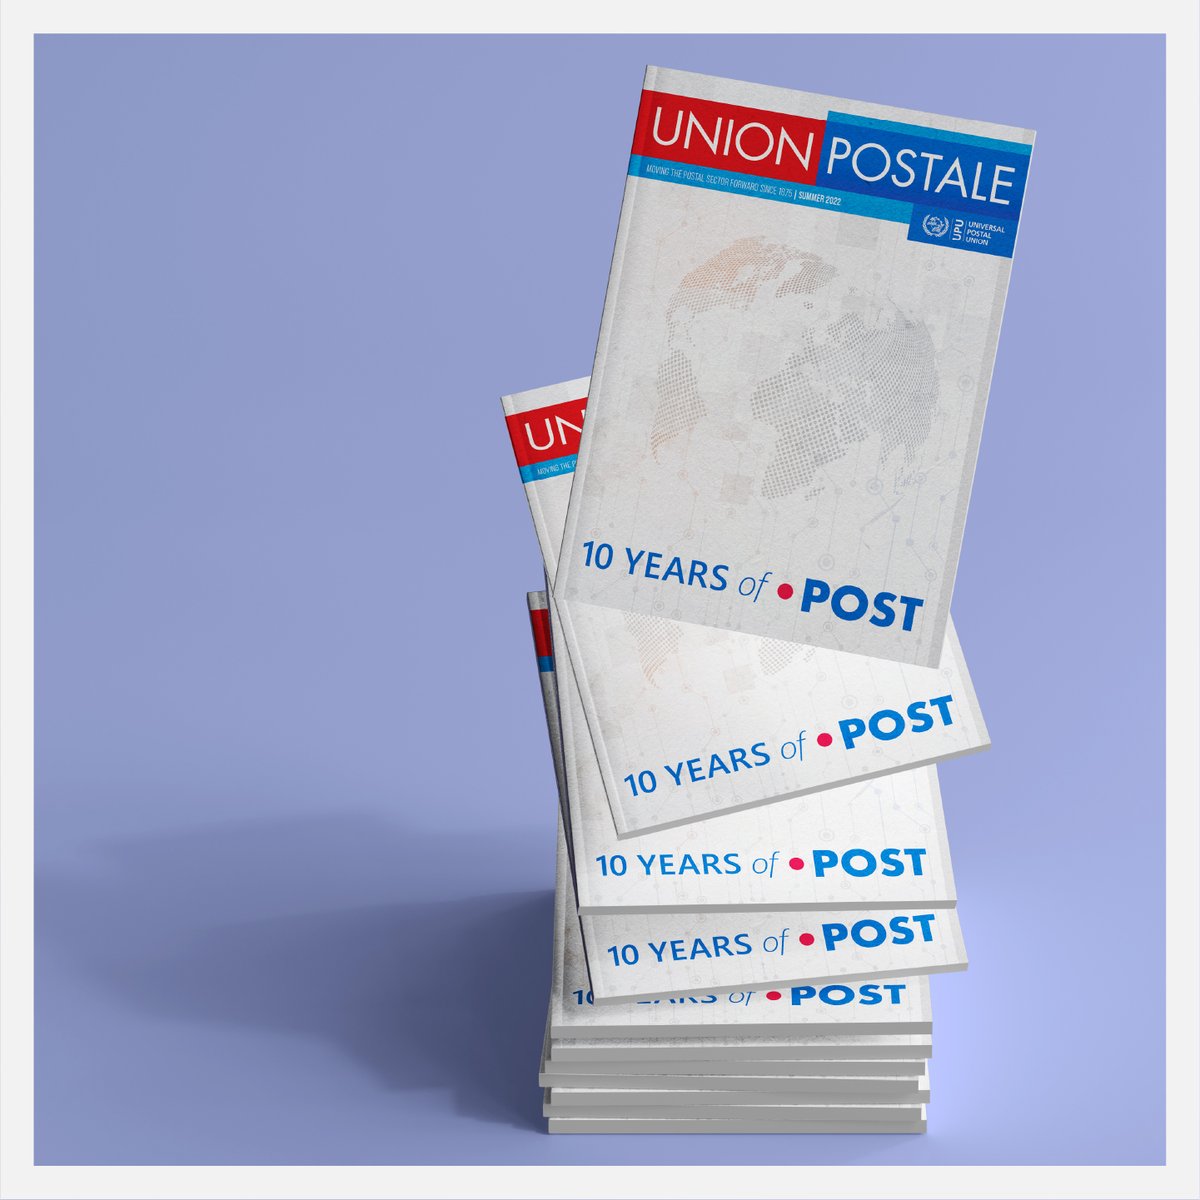 Partnerships are key for the success of postal #digitalization agendas📱

🗞The latest issue of the UPU’s magazine #UnionPostale puts a spotlight on #DigitalTransformation & bridging the #DigitalDivide through the Post👇

bit.ly/3HM1wCk

📣Stay tuned for the new edition!